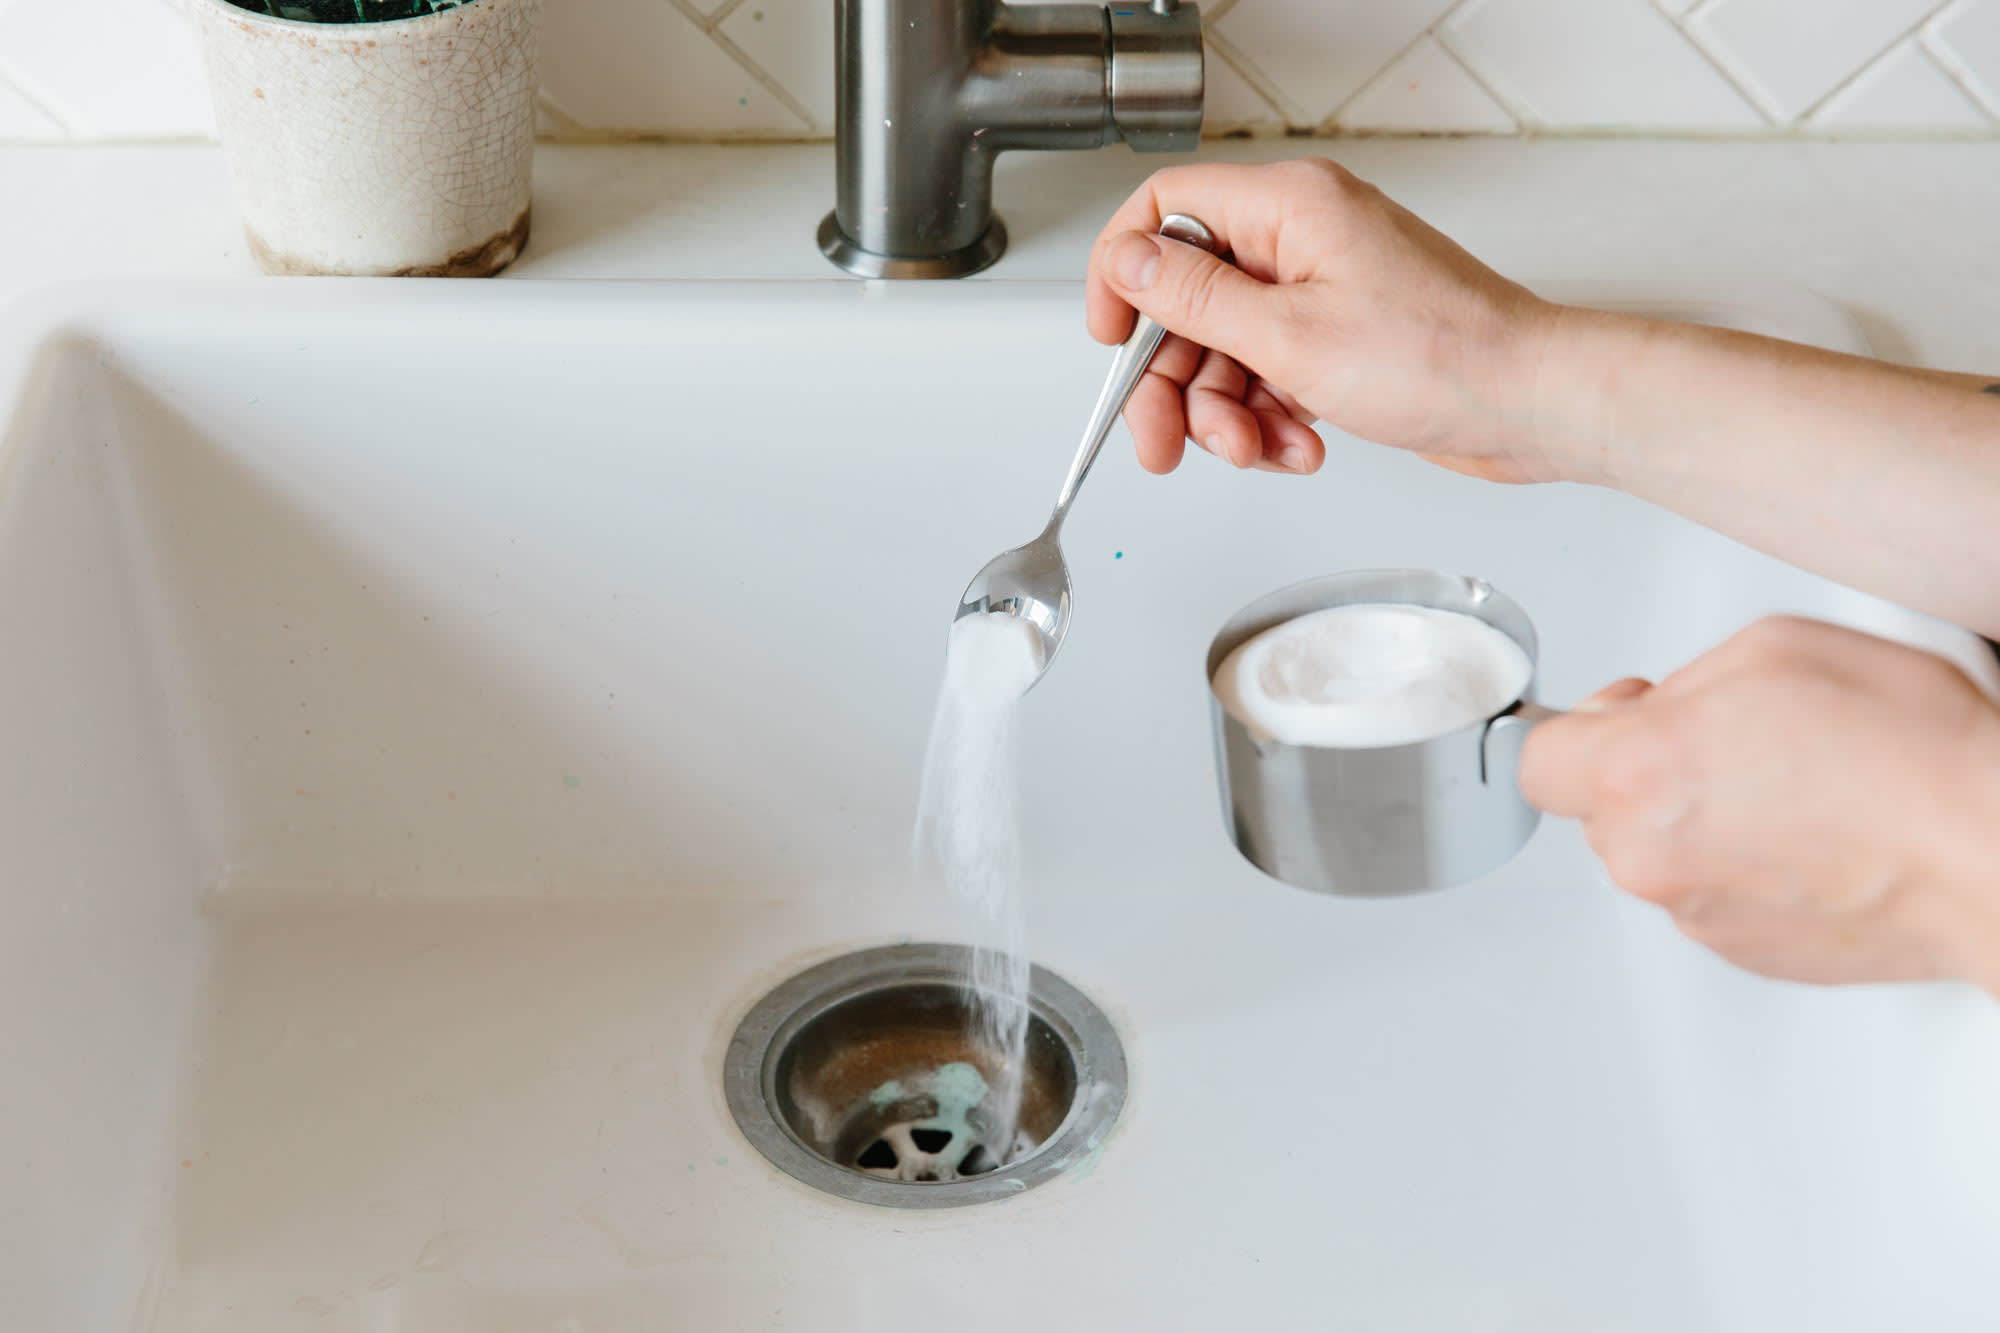 How To Fix Drain Smell Get Rid of Stinky Kitchen Sink Smells | Kitchn